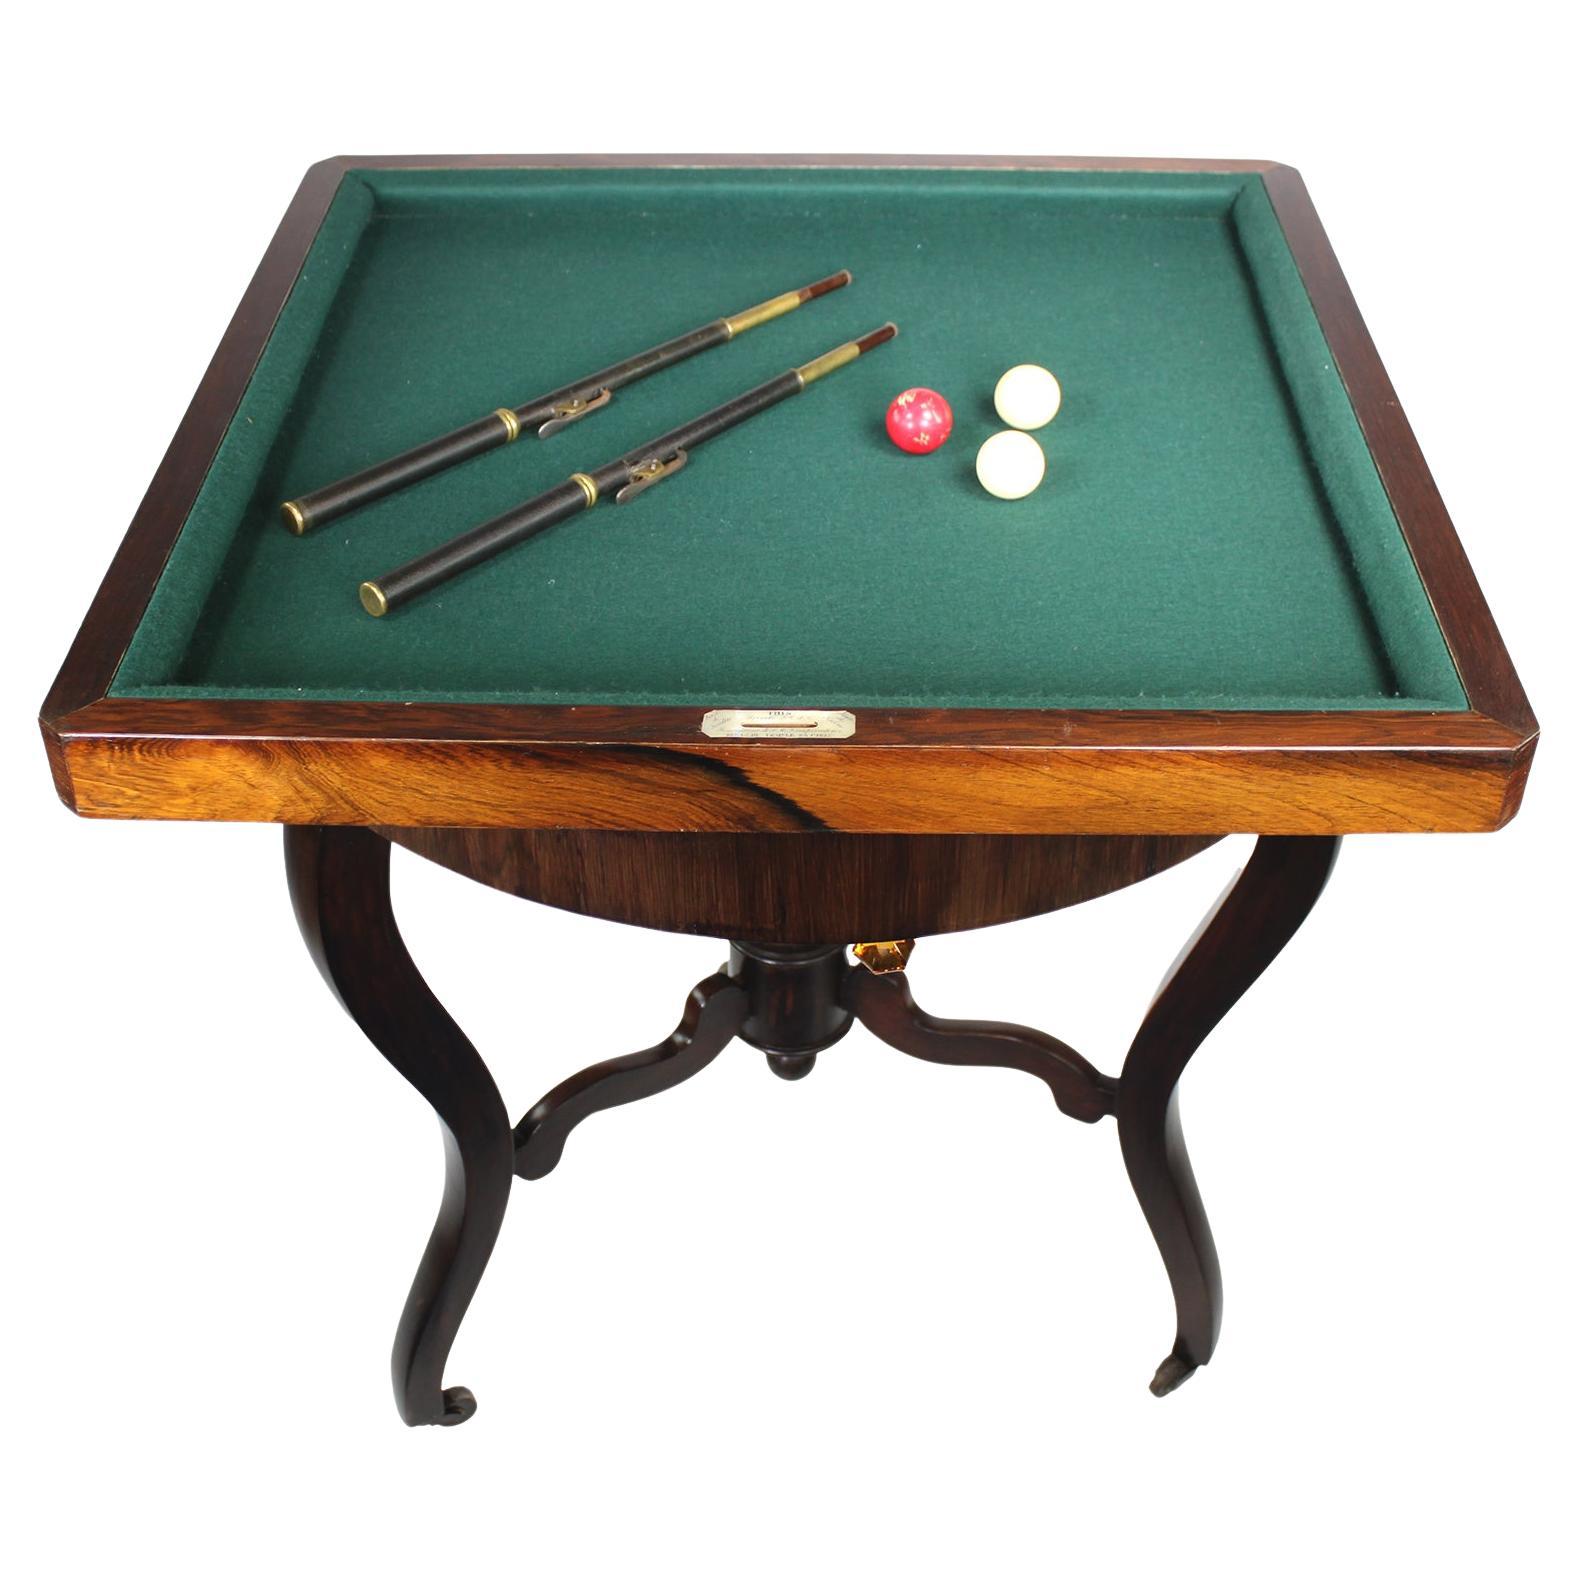 A Very Fine and Rare French Louis Philippe Carom Billiard - Draughts - Card - International Checkers Game Table by 